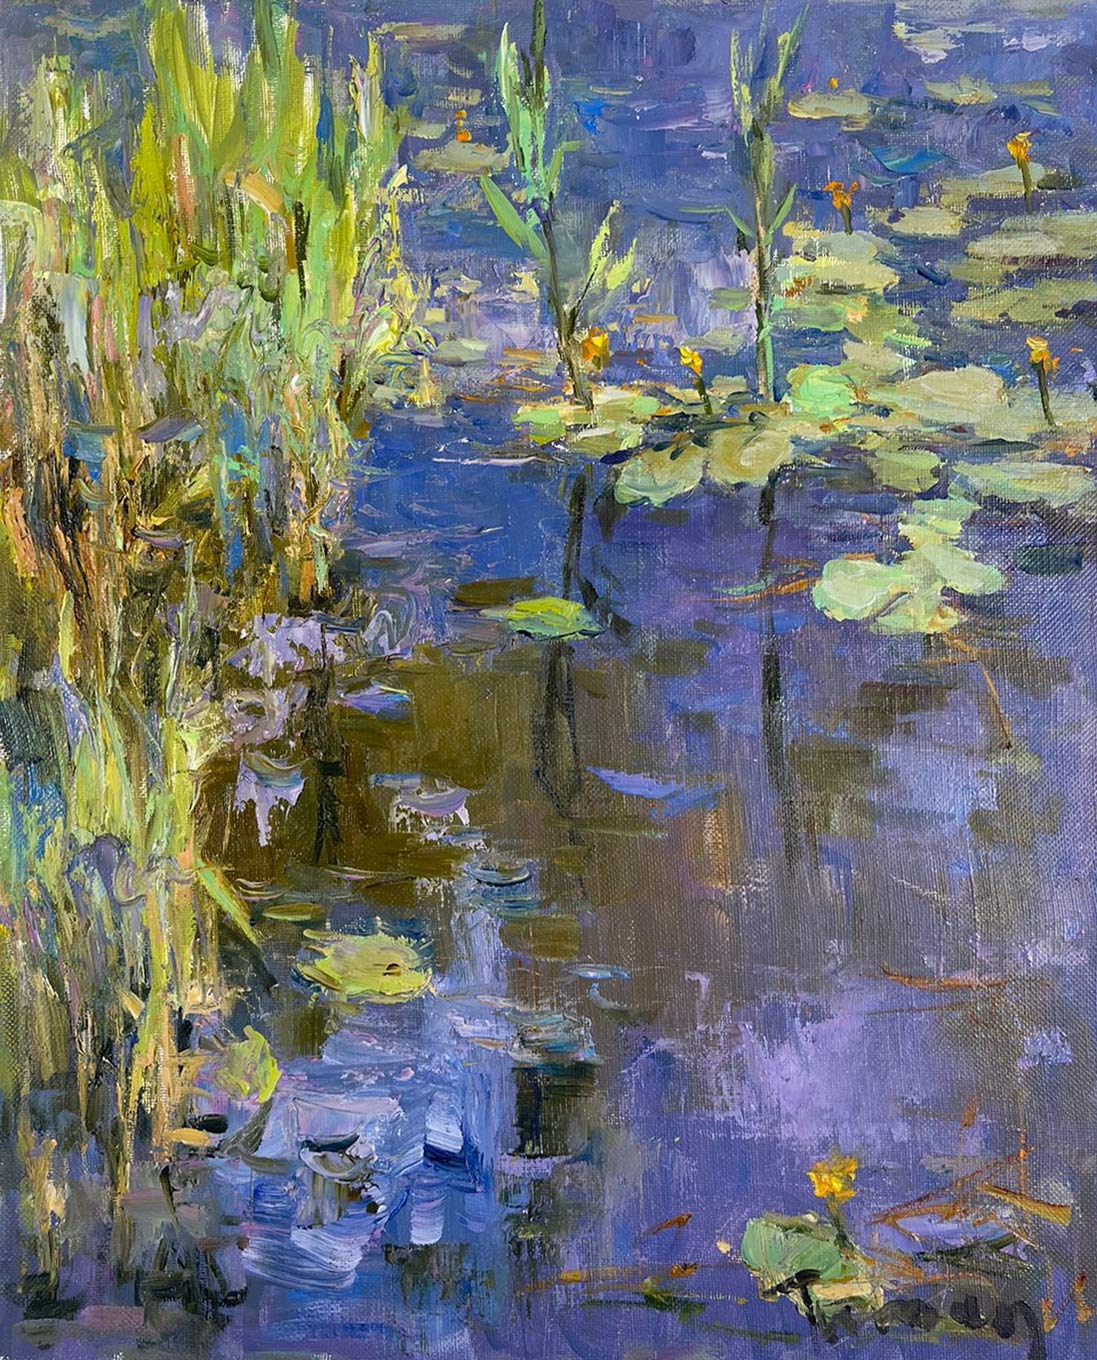 Time Of Waterlilies - 1, Tuman Zhumabaev, Buy the painting Oil